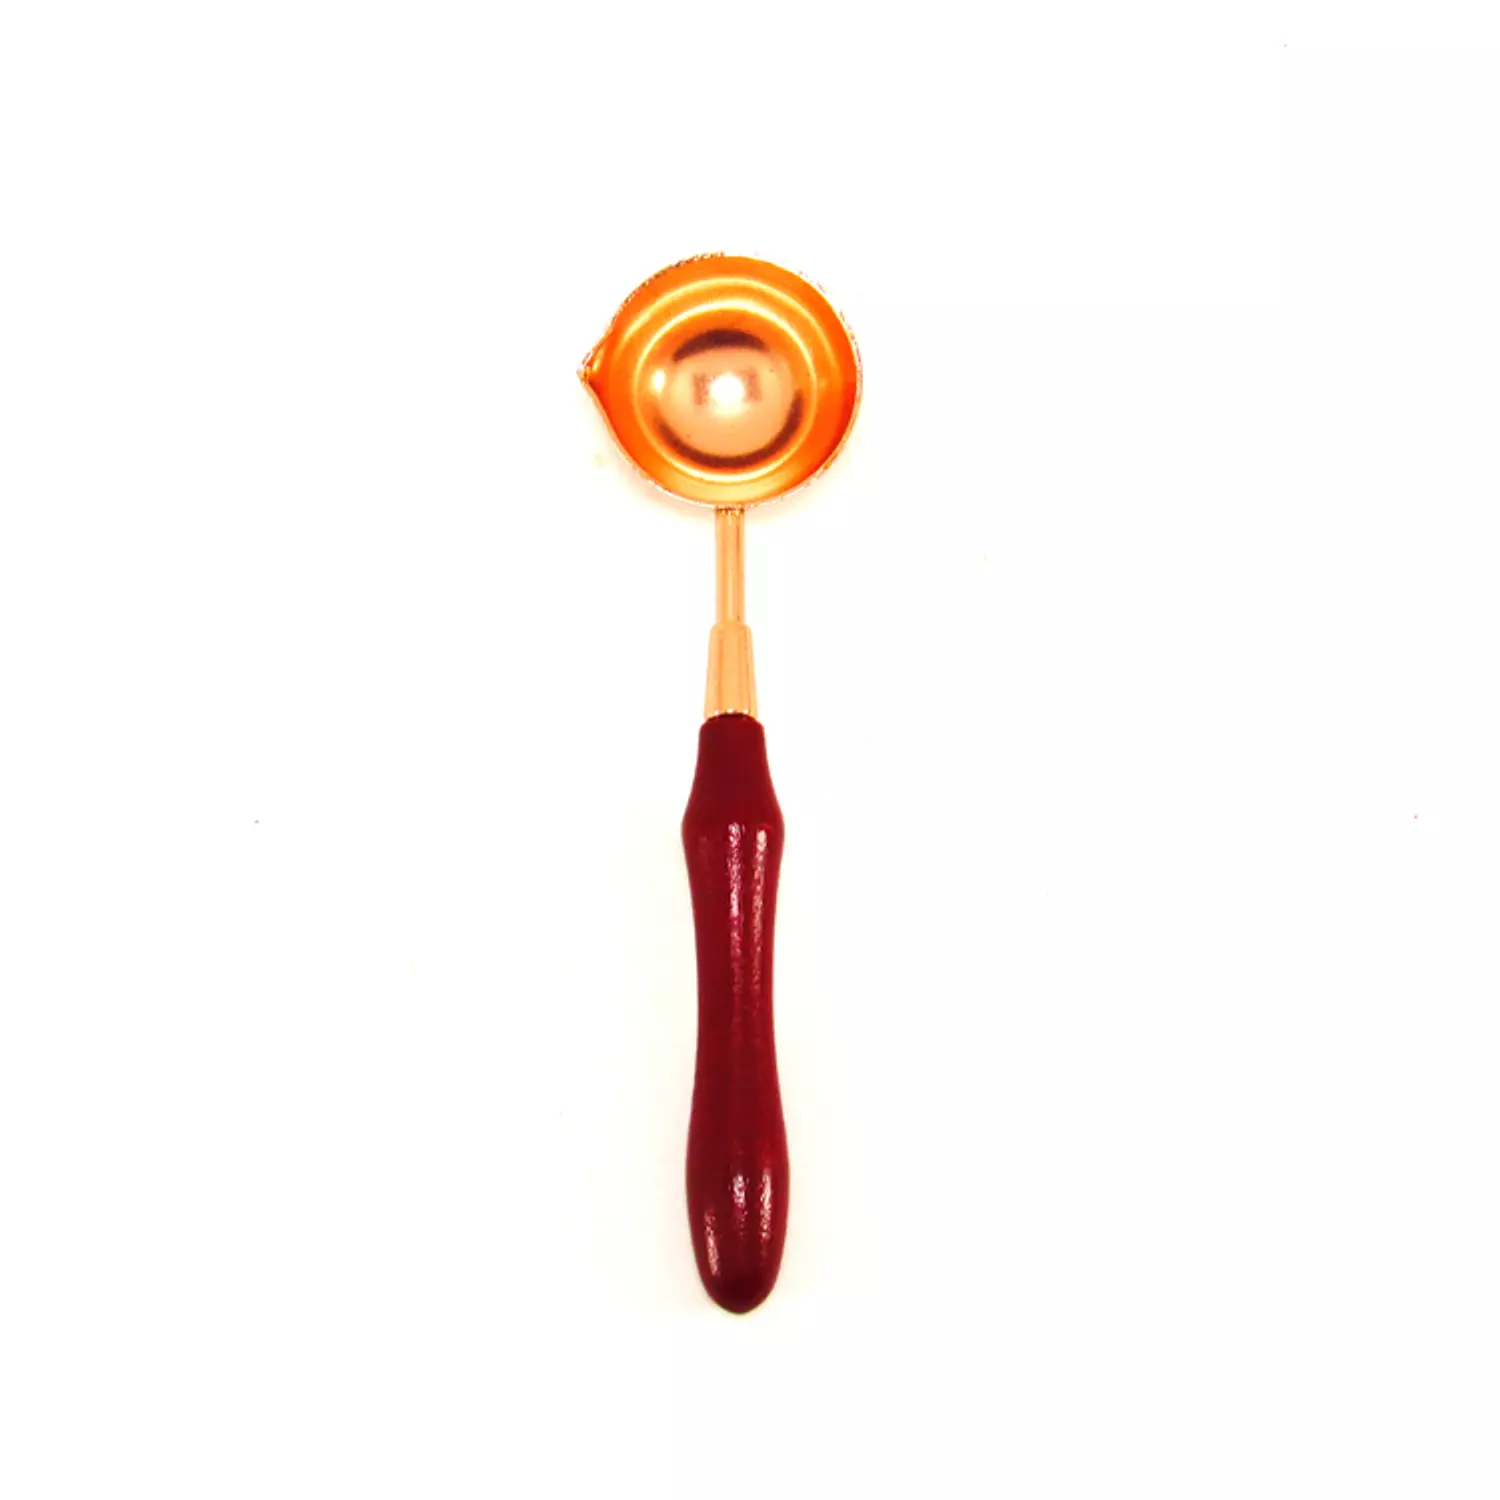 Wax seal spoon - wood hand hover image